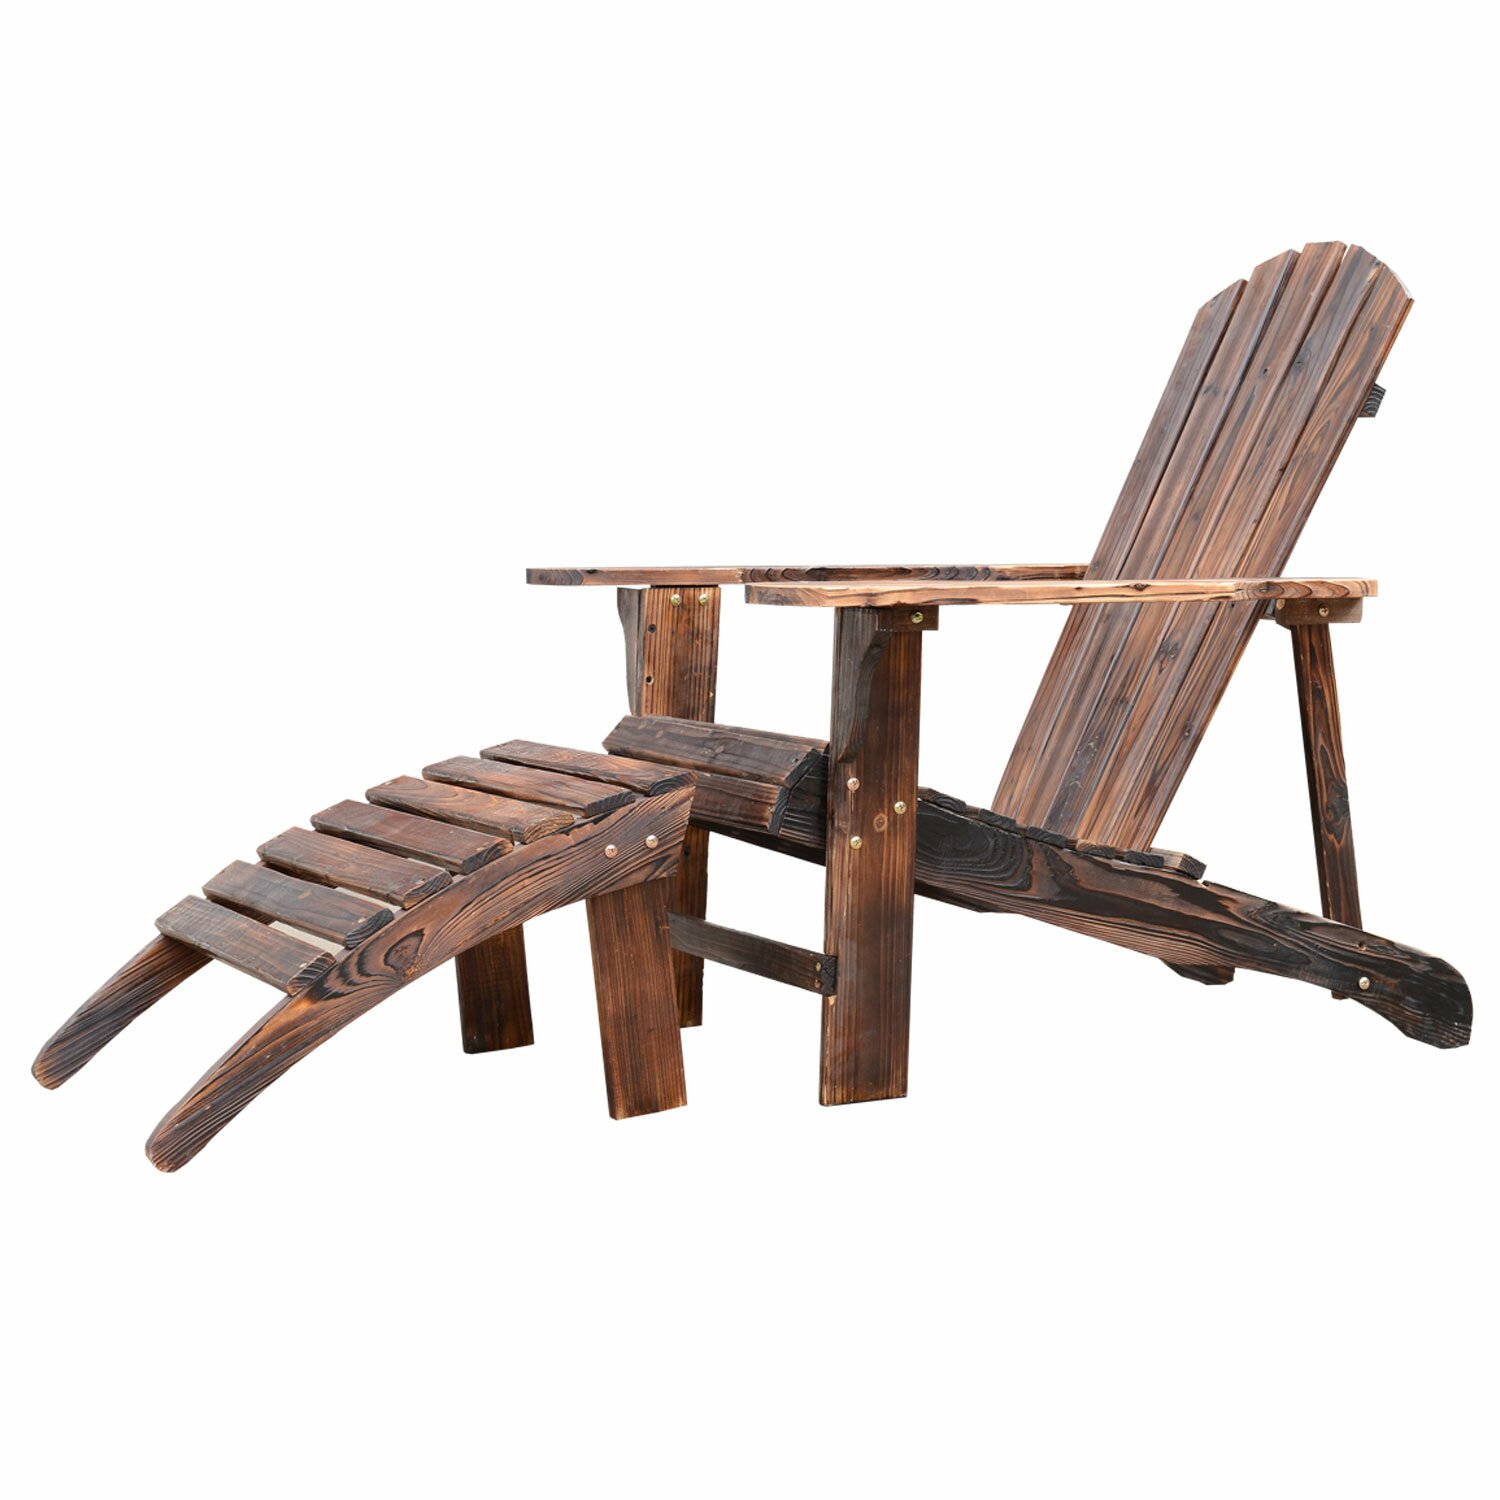 Outsunny Adirondack Chair with Ottoman & Reviews Wayfair